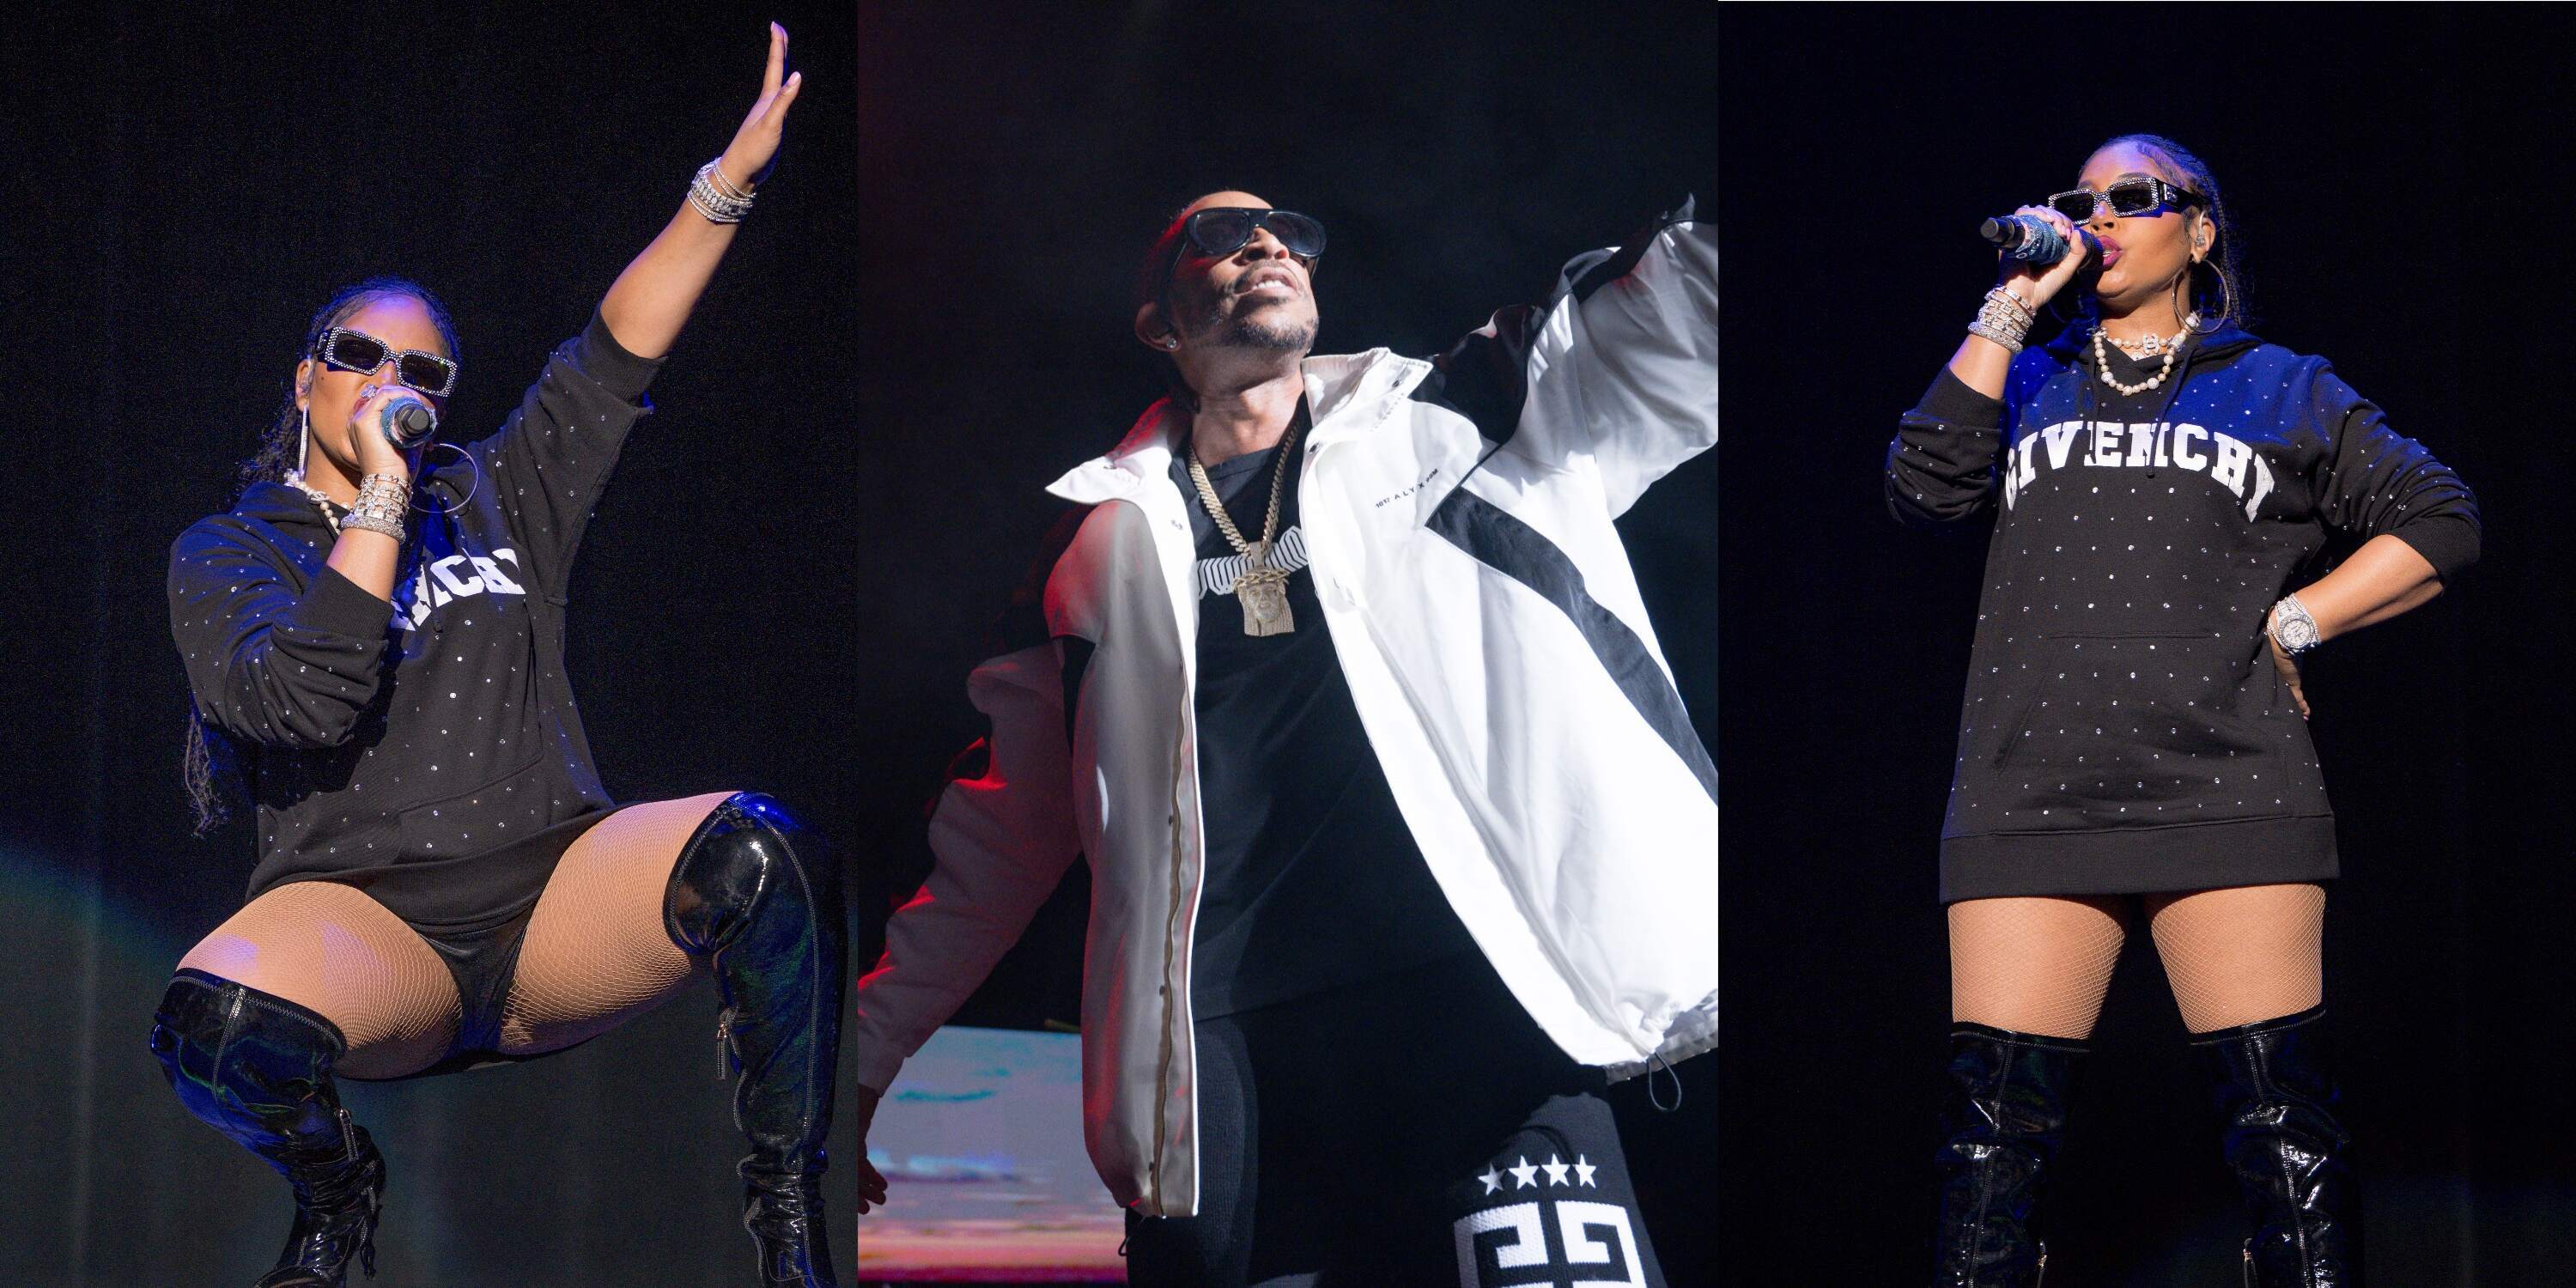 Side by side photos of Ashanti squatting, Ludacris rapping, and Ashanti singing into the mic